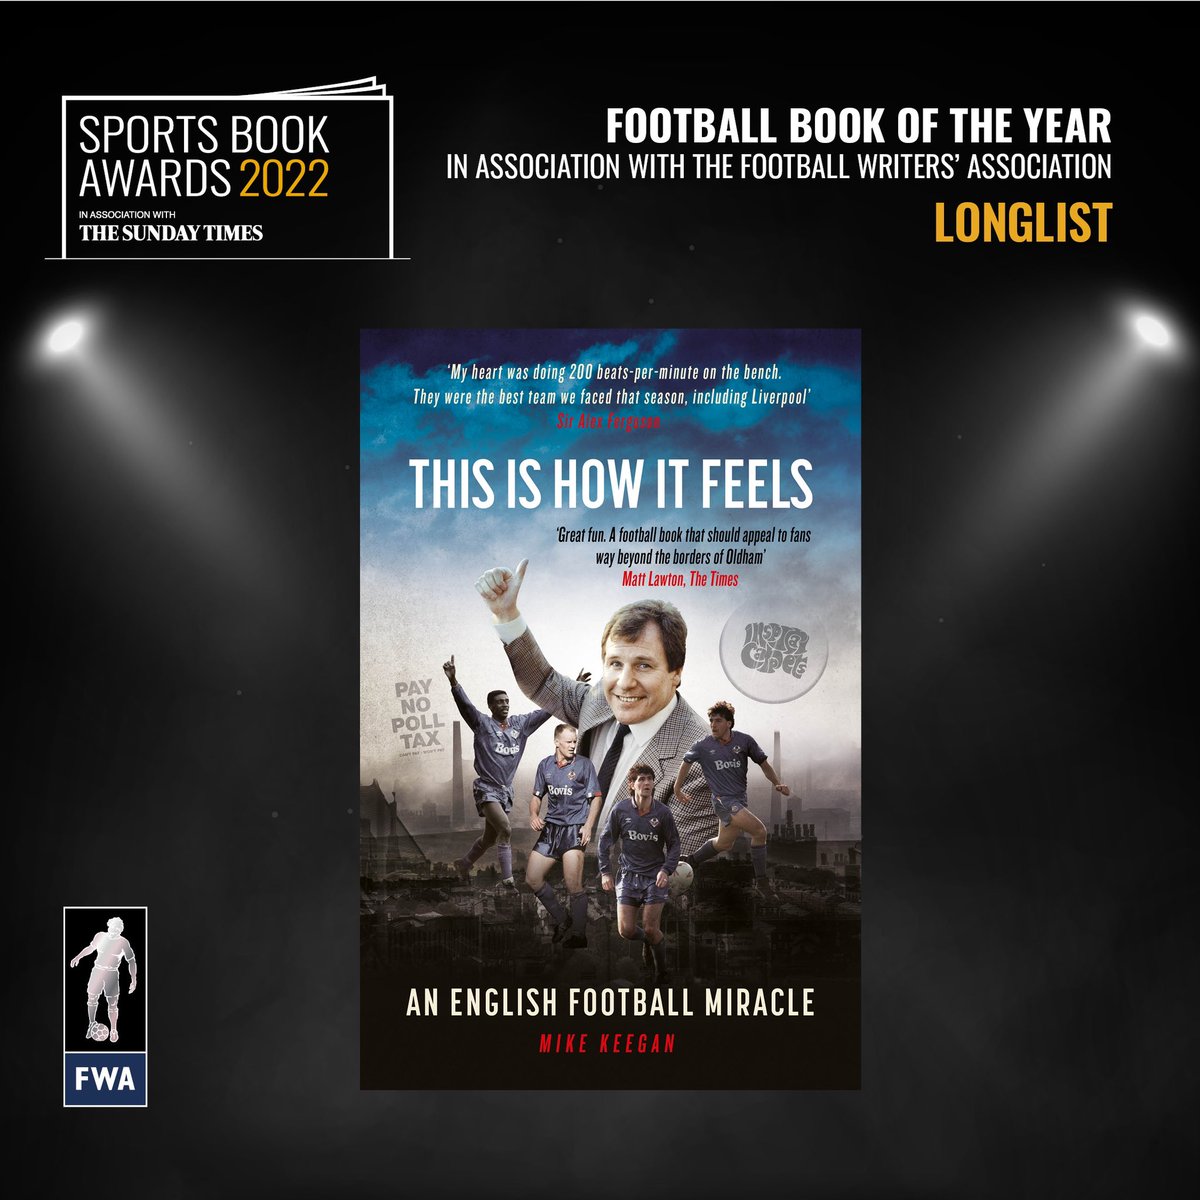 Delighted, humbled and honoured that This Is How It Feels has made the @sportsbookaward football book of the year longlist. #SBA22 #ReadingForSport